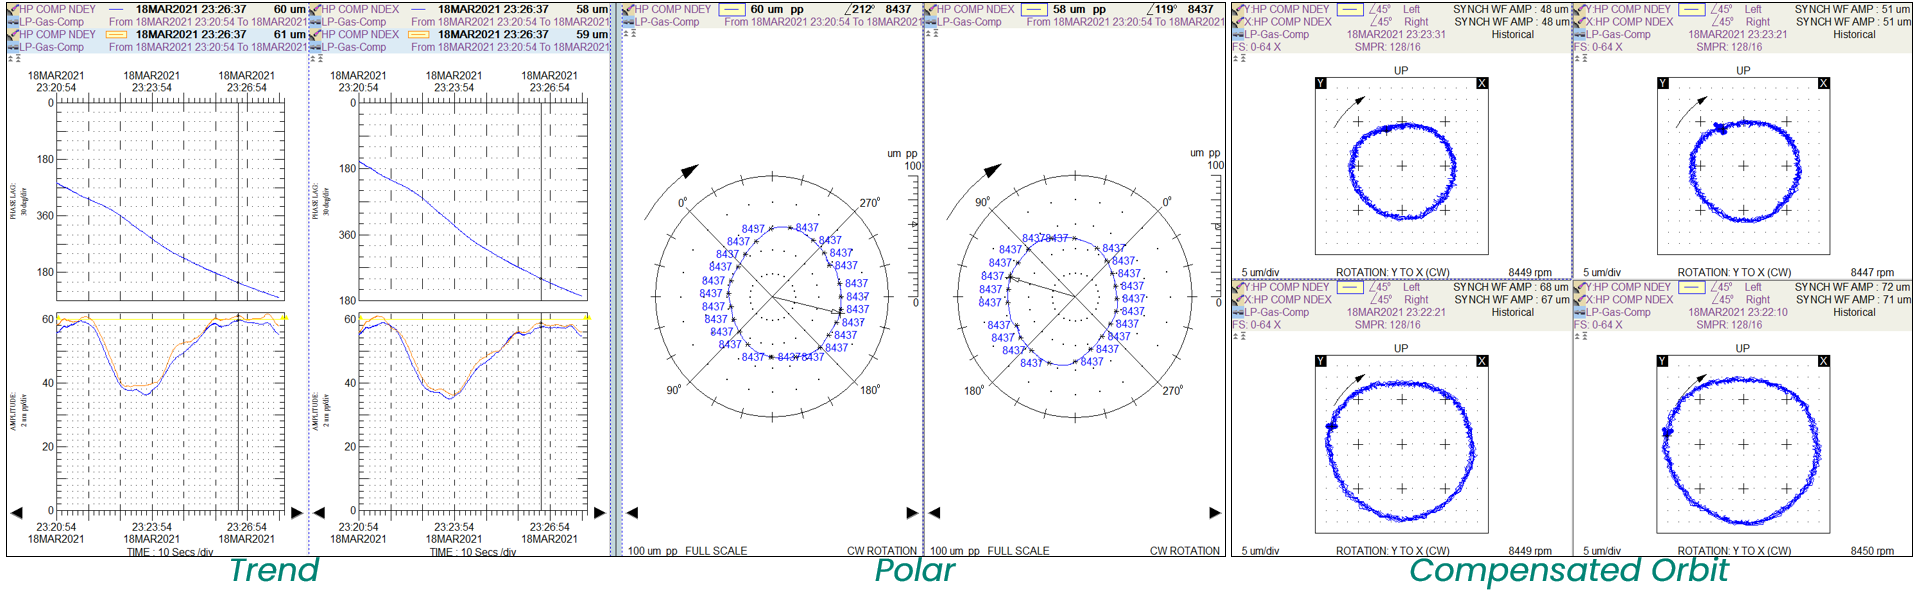 Trend, Polar &amp; Orbit plots for vibration excursion at the compressor NDE bearing. 